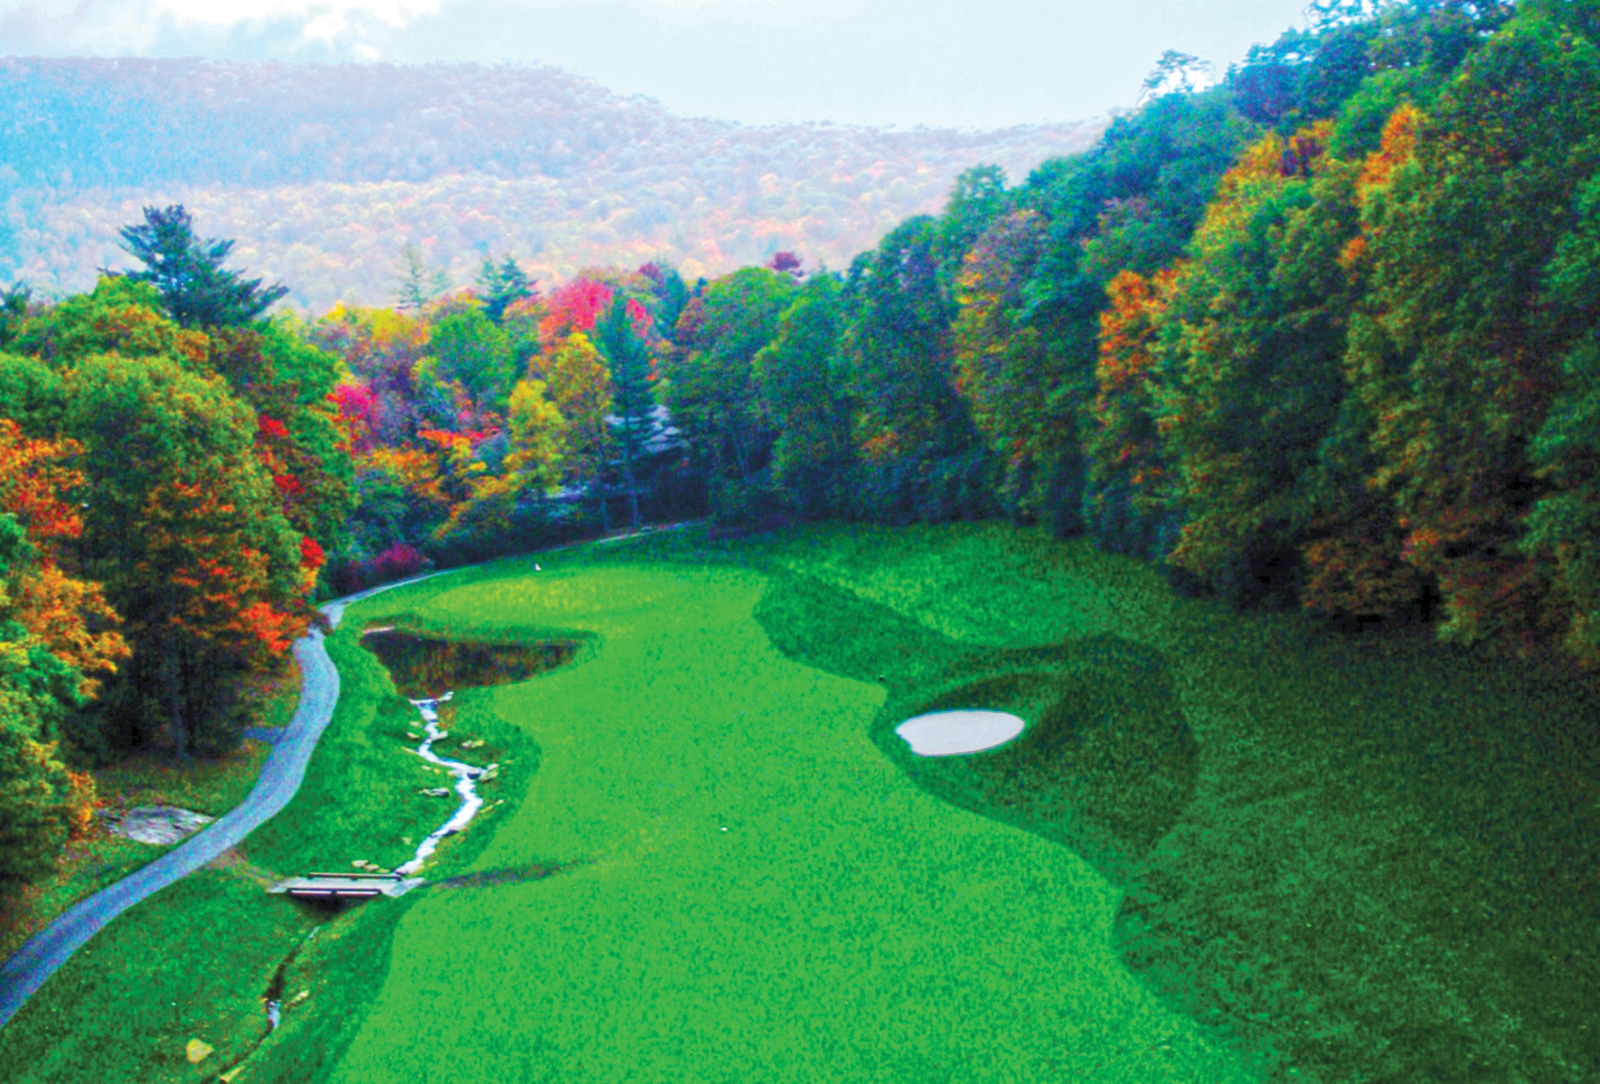 Wildcat-Cliffs-country-club-highlands-nc-scholarship-golf-fall-leaves